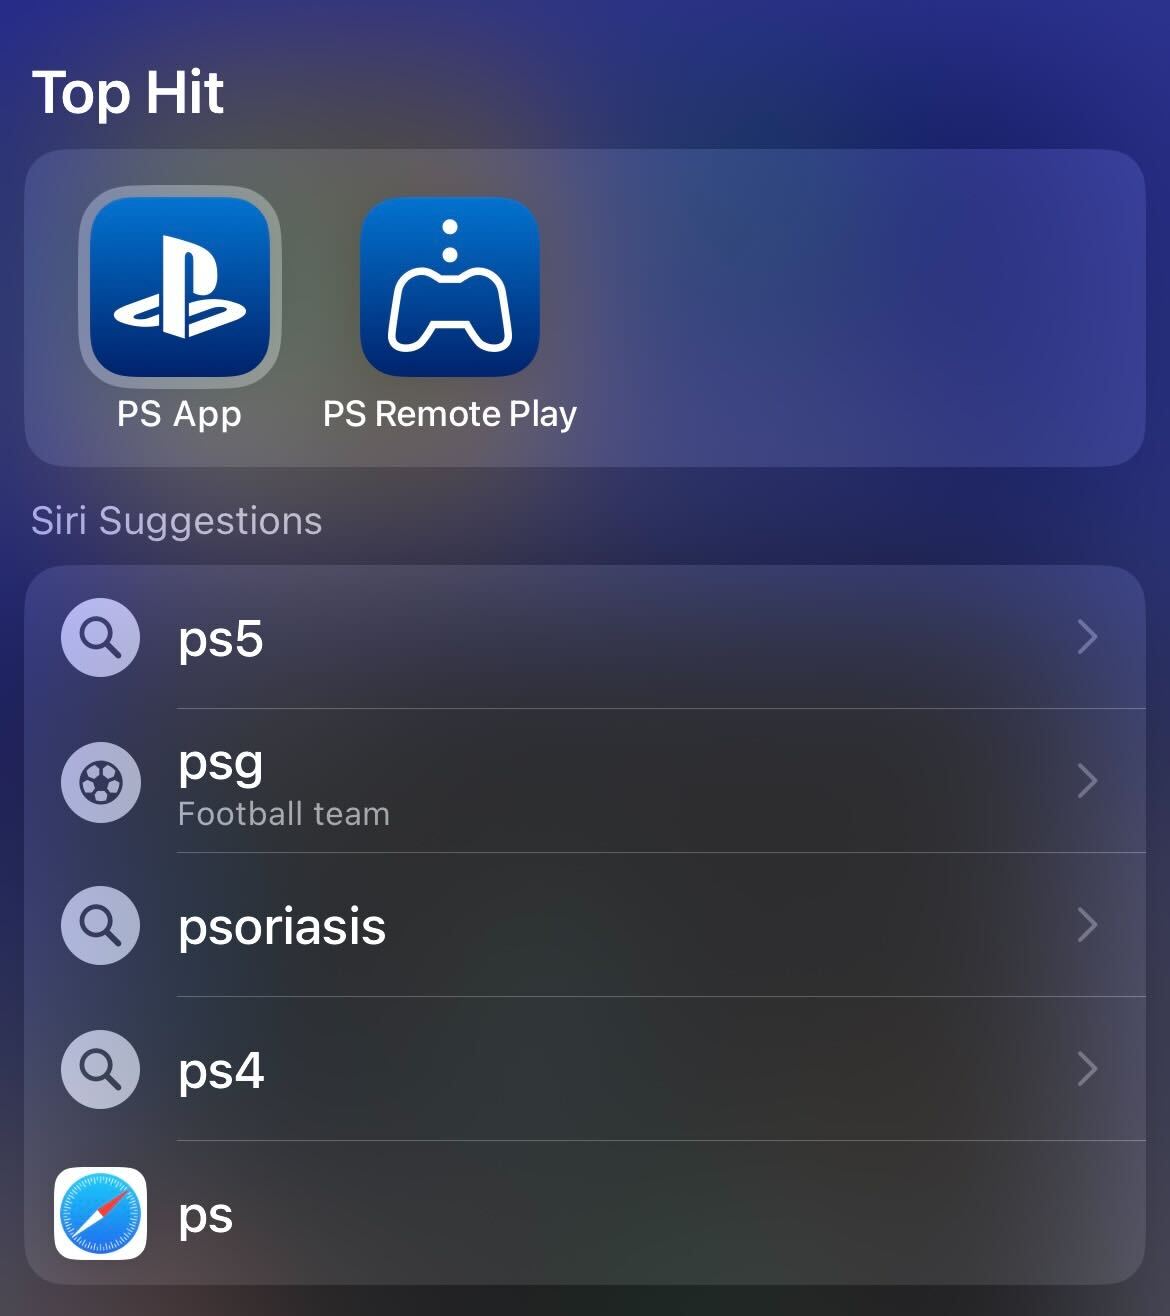 Go to the PS Remote App